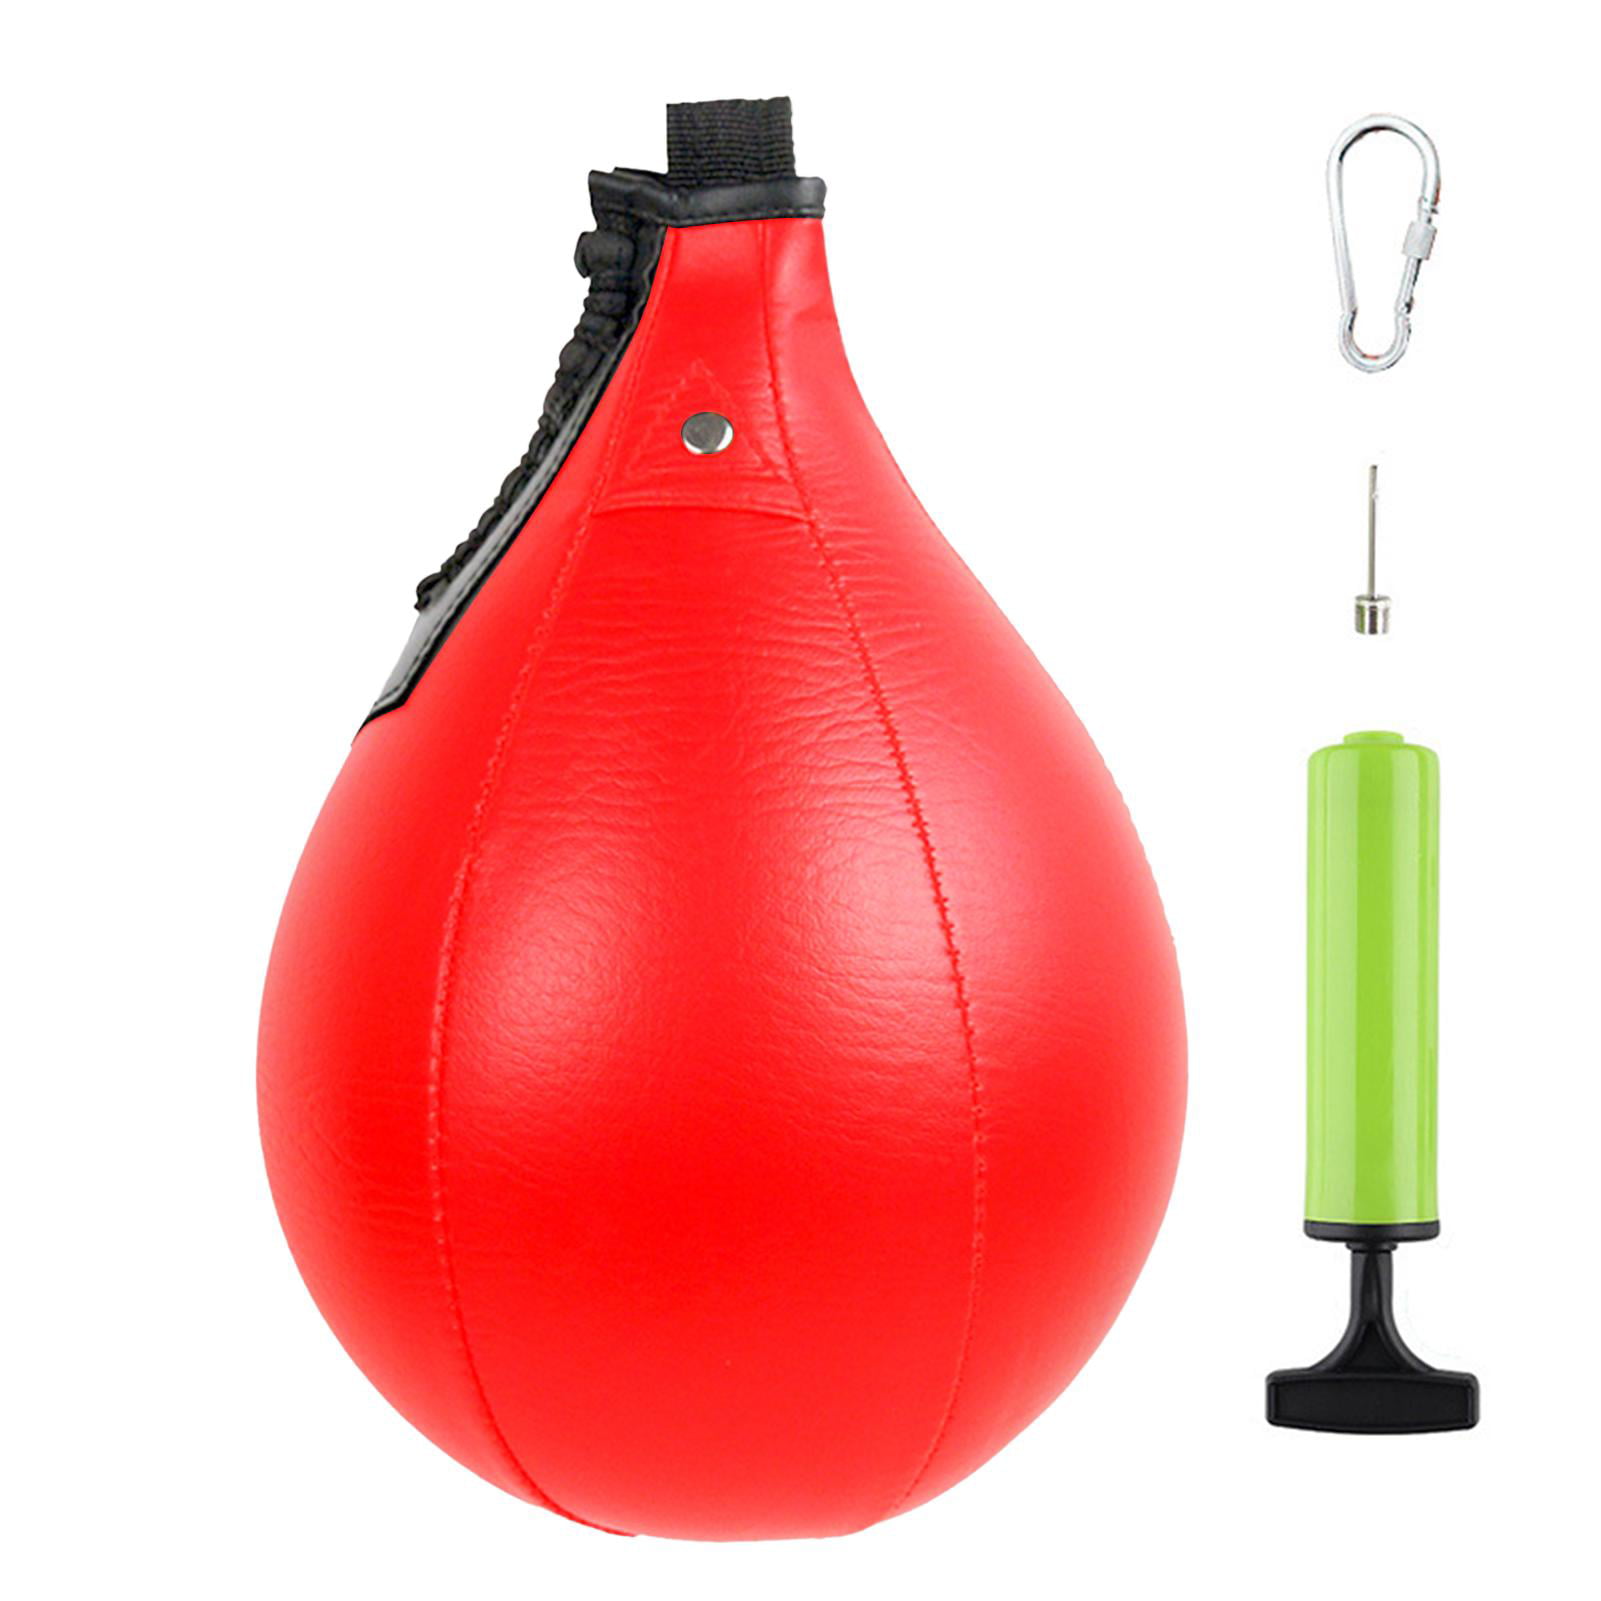 Details about   Double End Boxing Punching Bag Speed Gym Ball Training MMA Punch Leather Reflex 